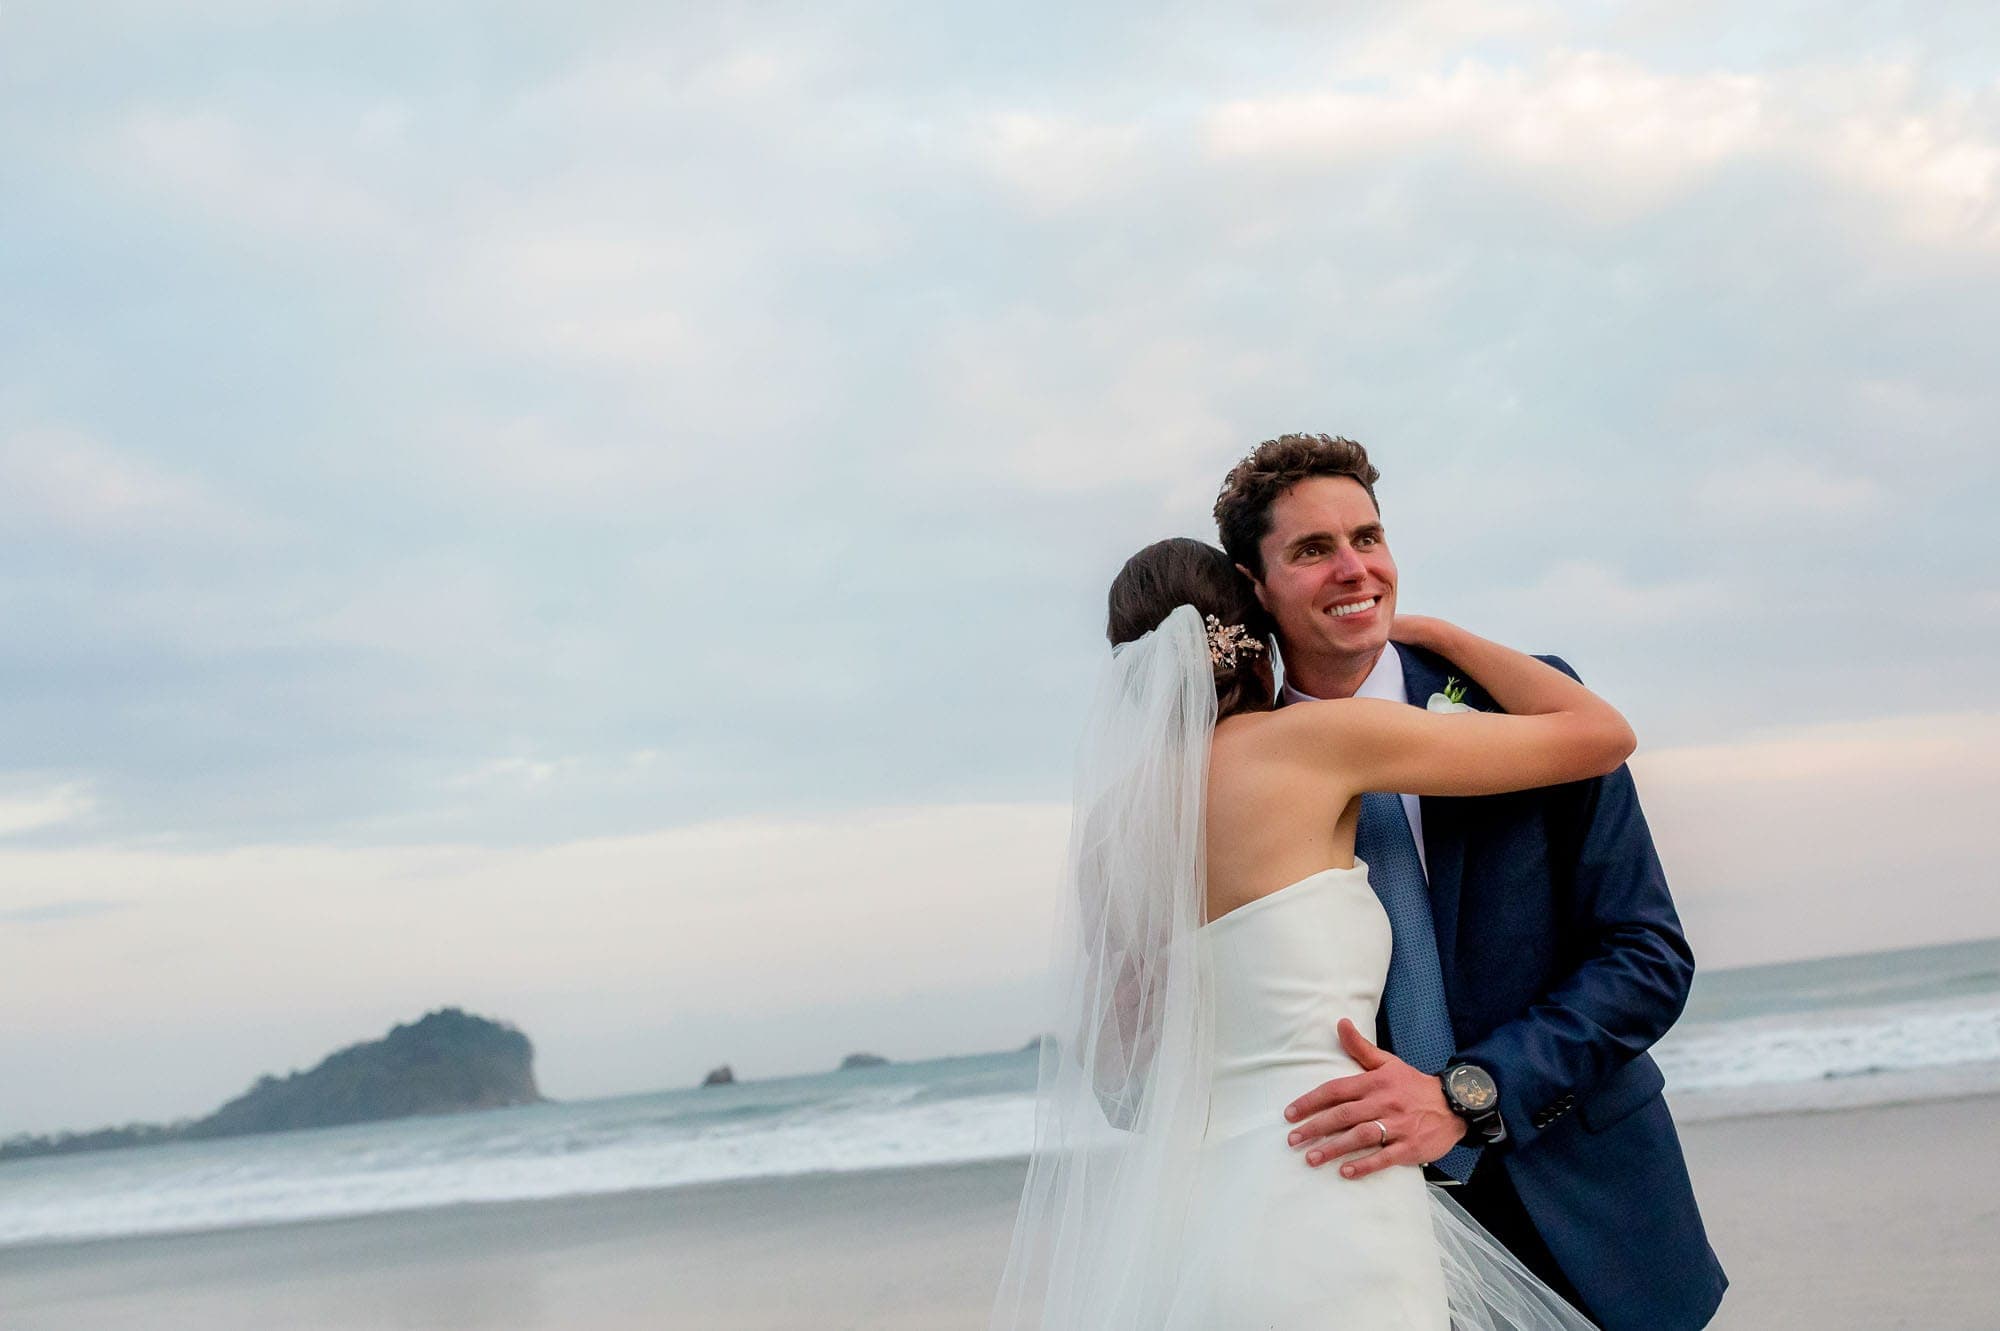 Getting married in Costa Rica means epic bridal portraits!